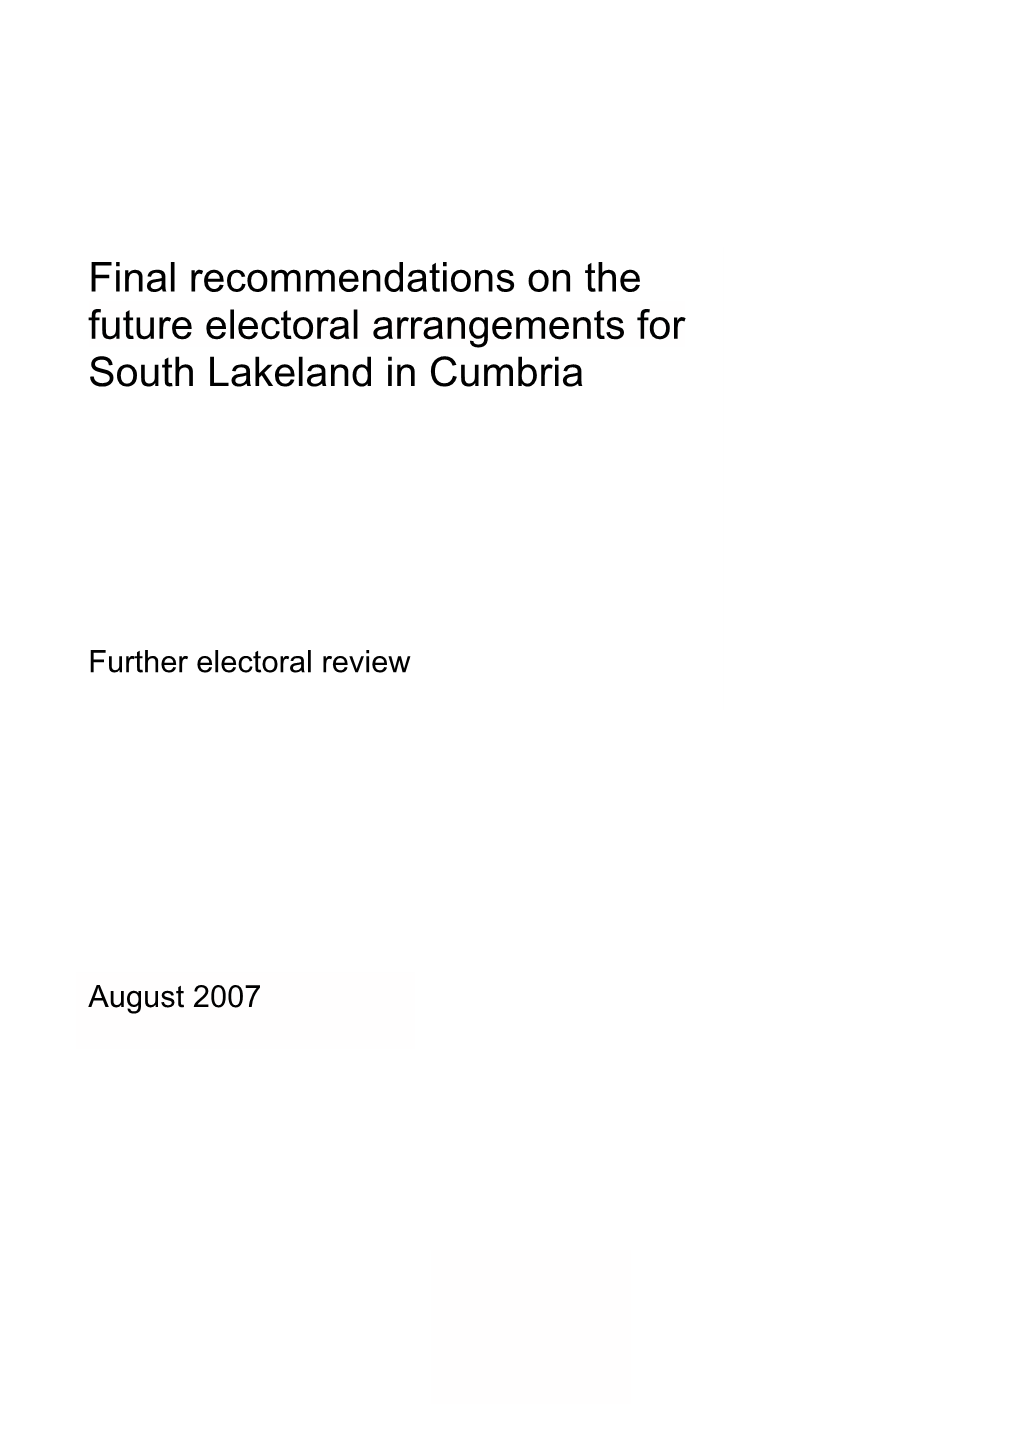 Final Recommendations on the Future Electoral Arrangements for South Lakeland in Cumbria